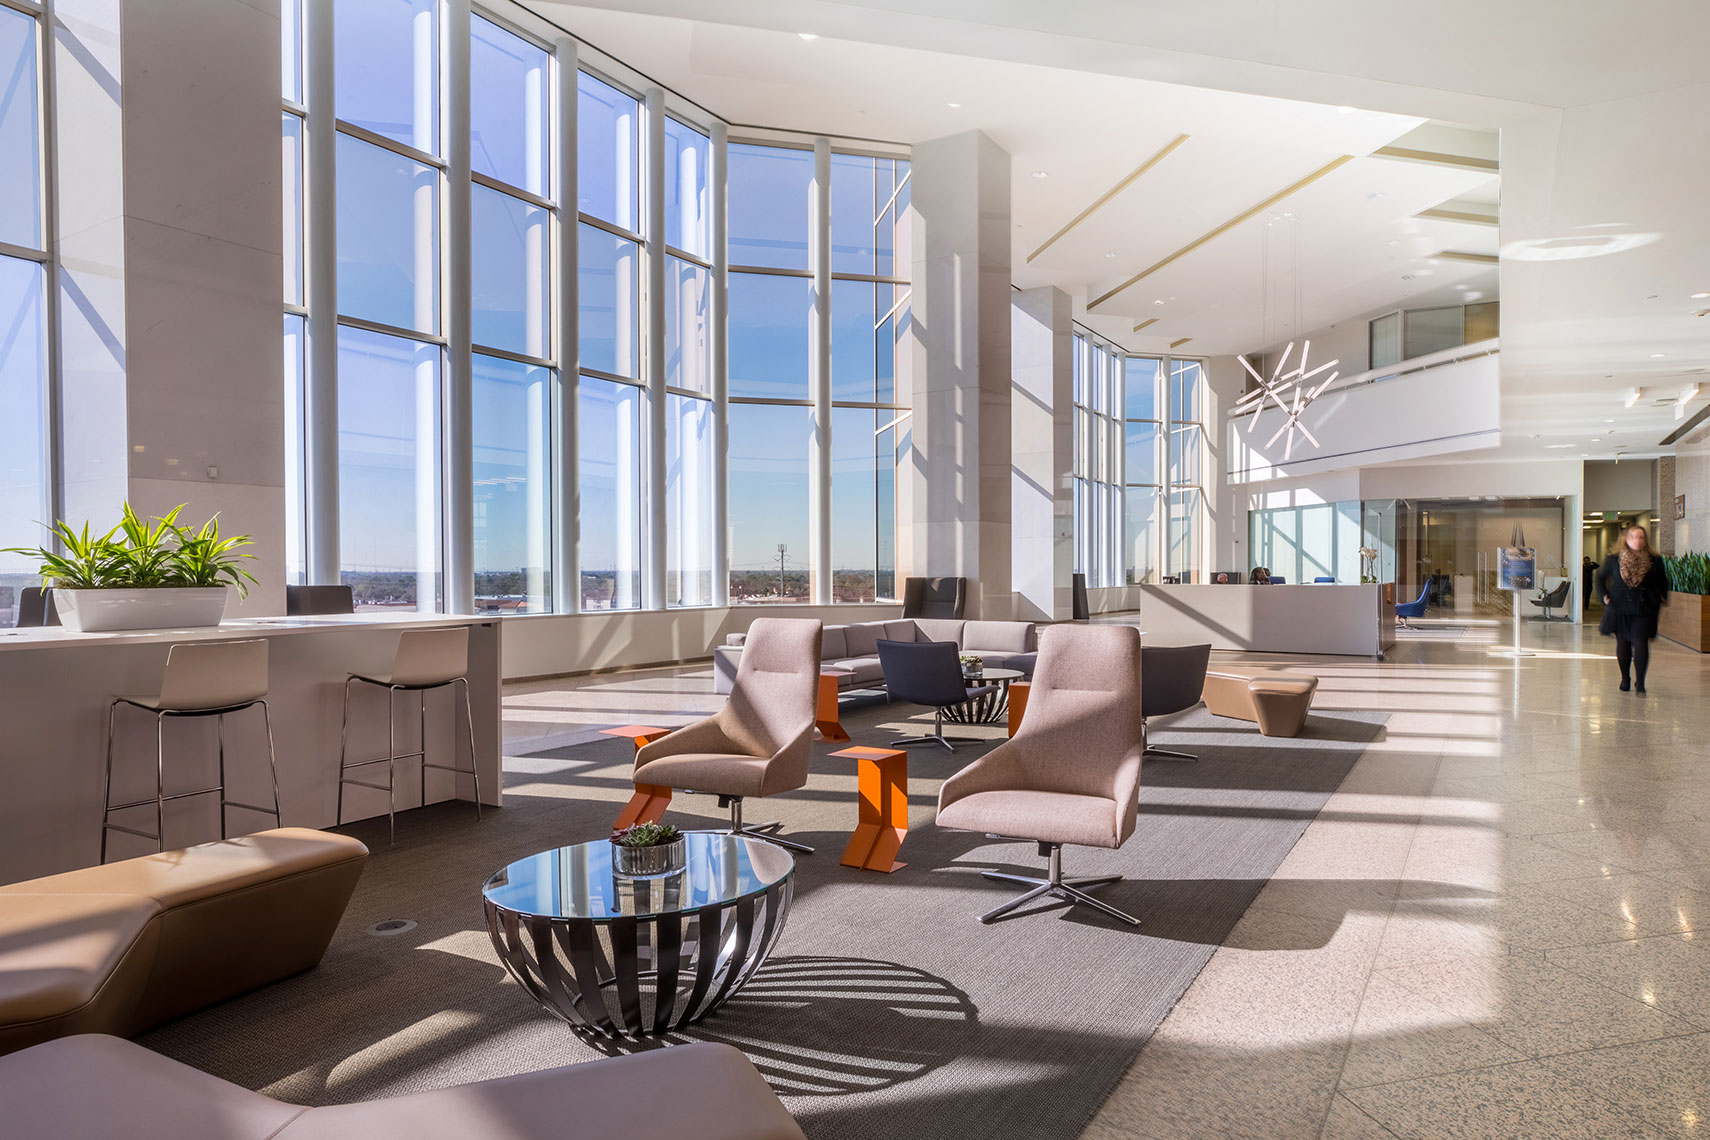 the Lobby of a modern office building by an architectural photographer in the gulf coast